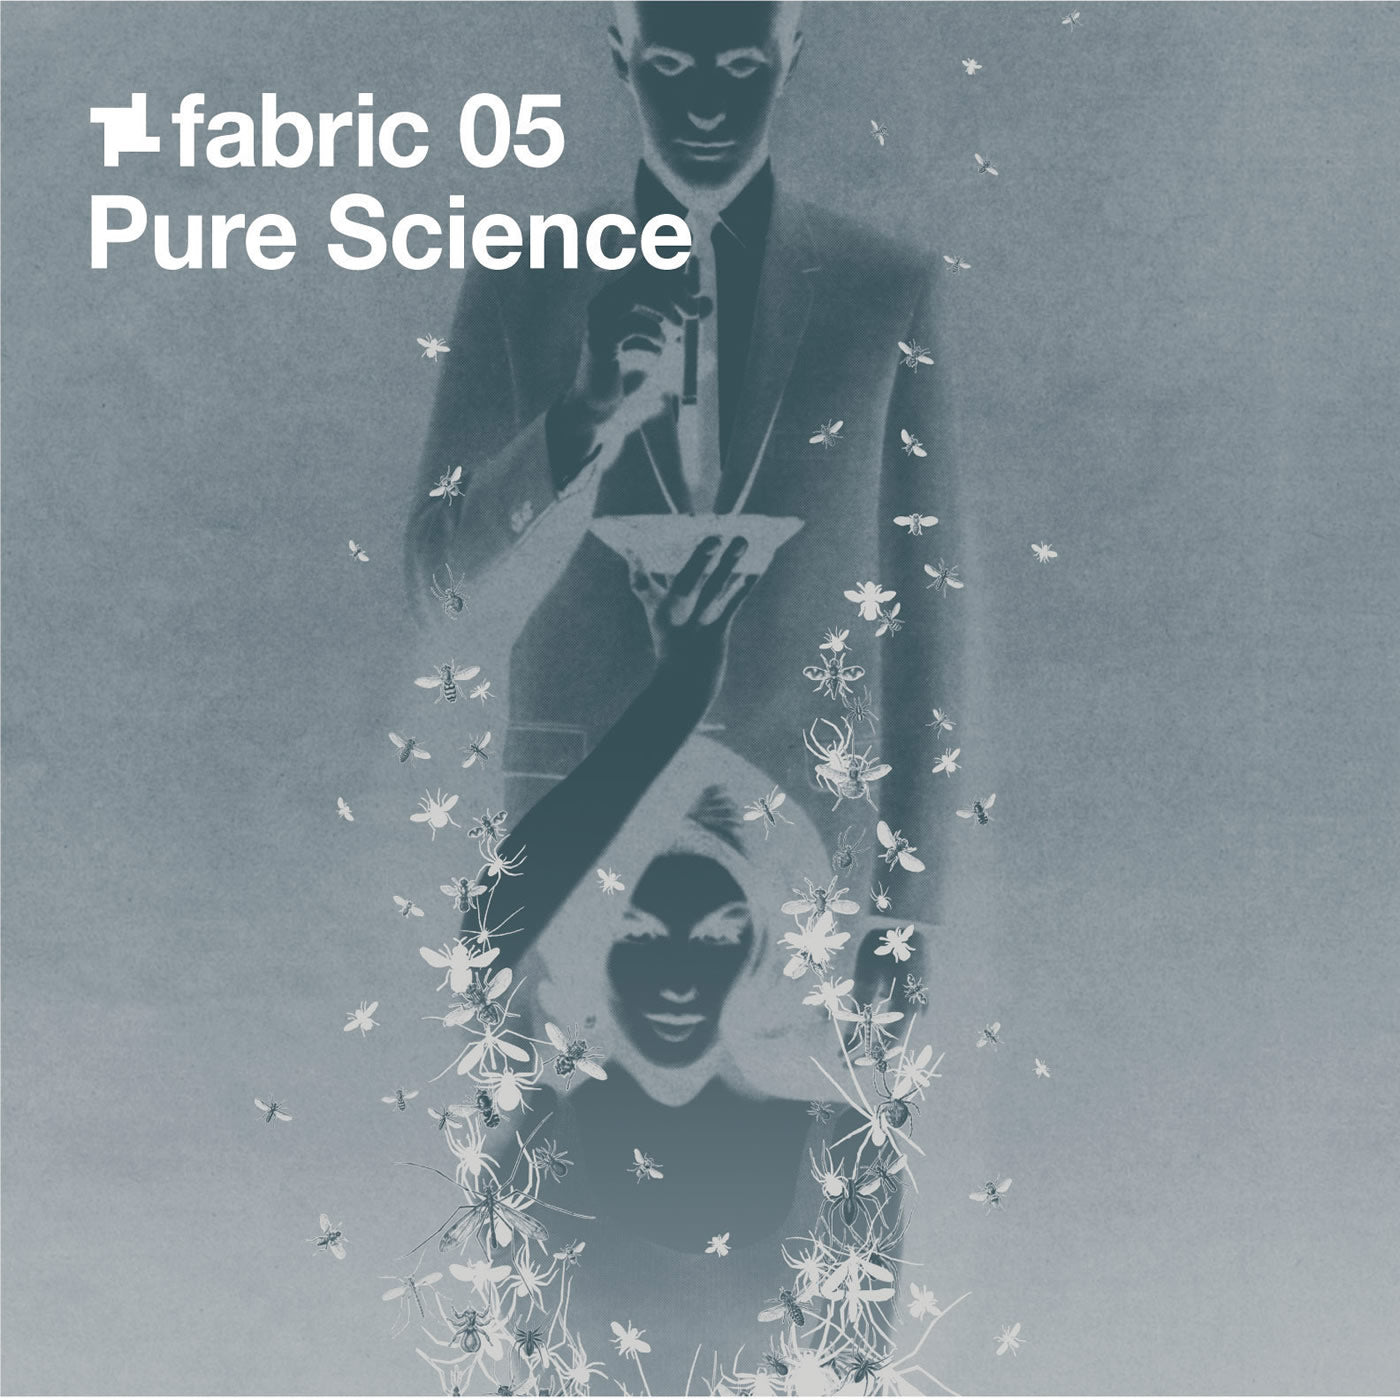 Pure Science - fabric 05 CD